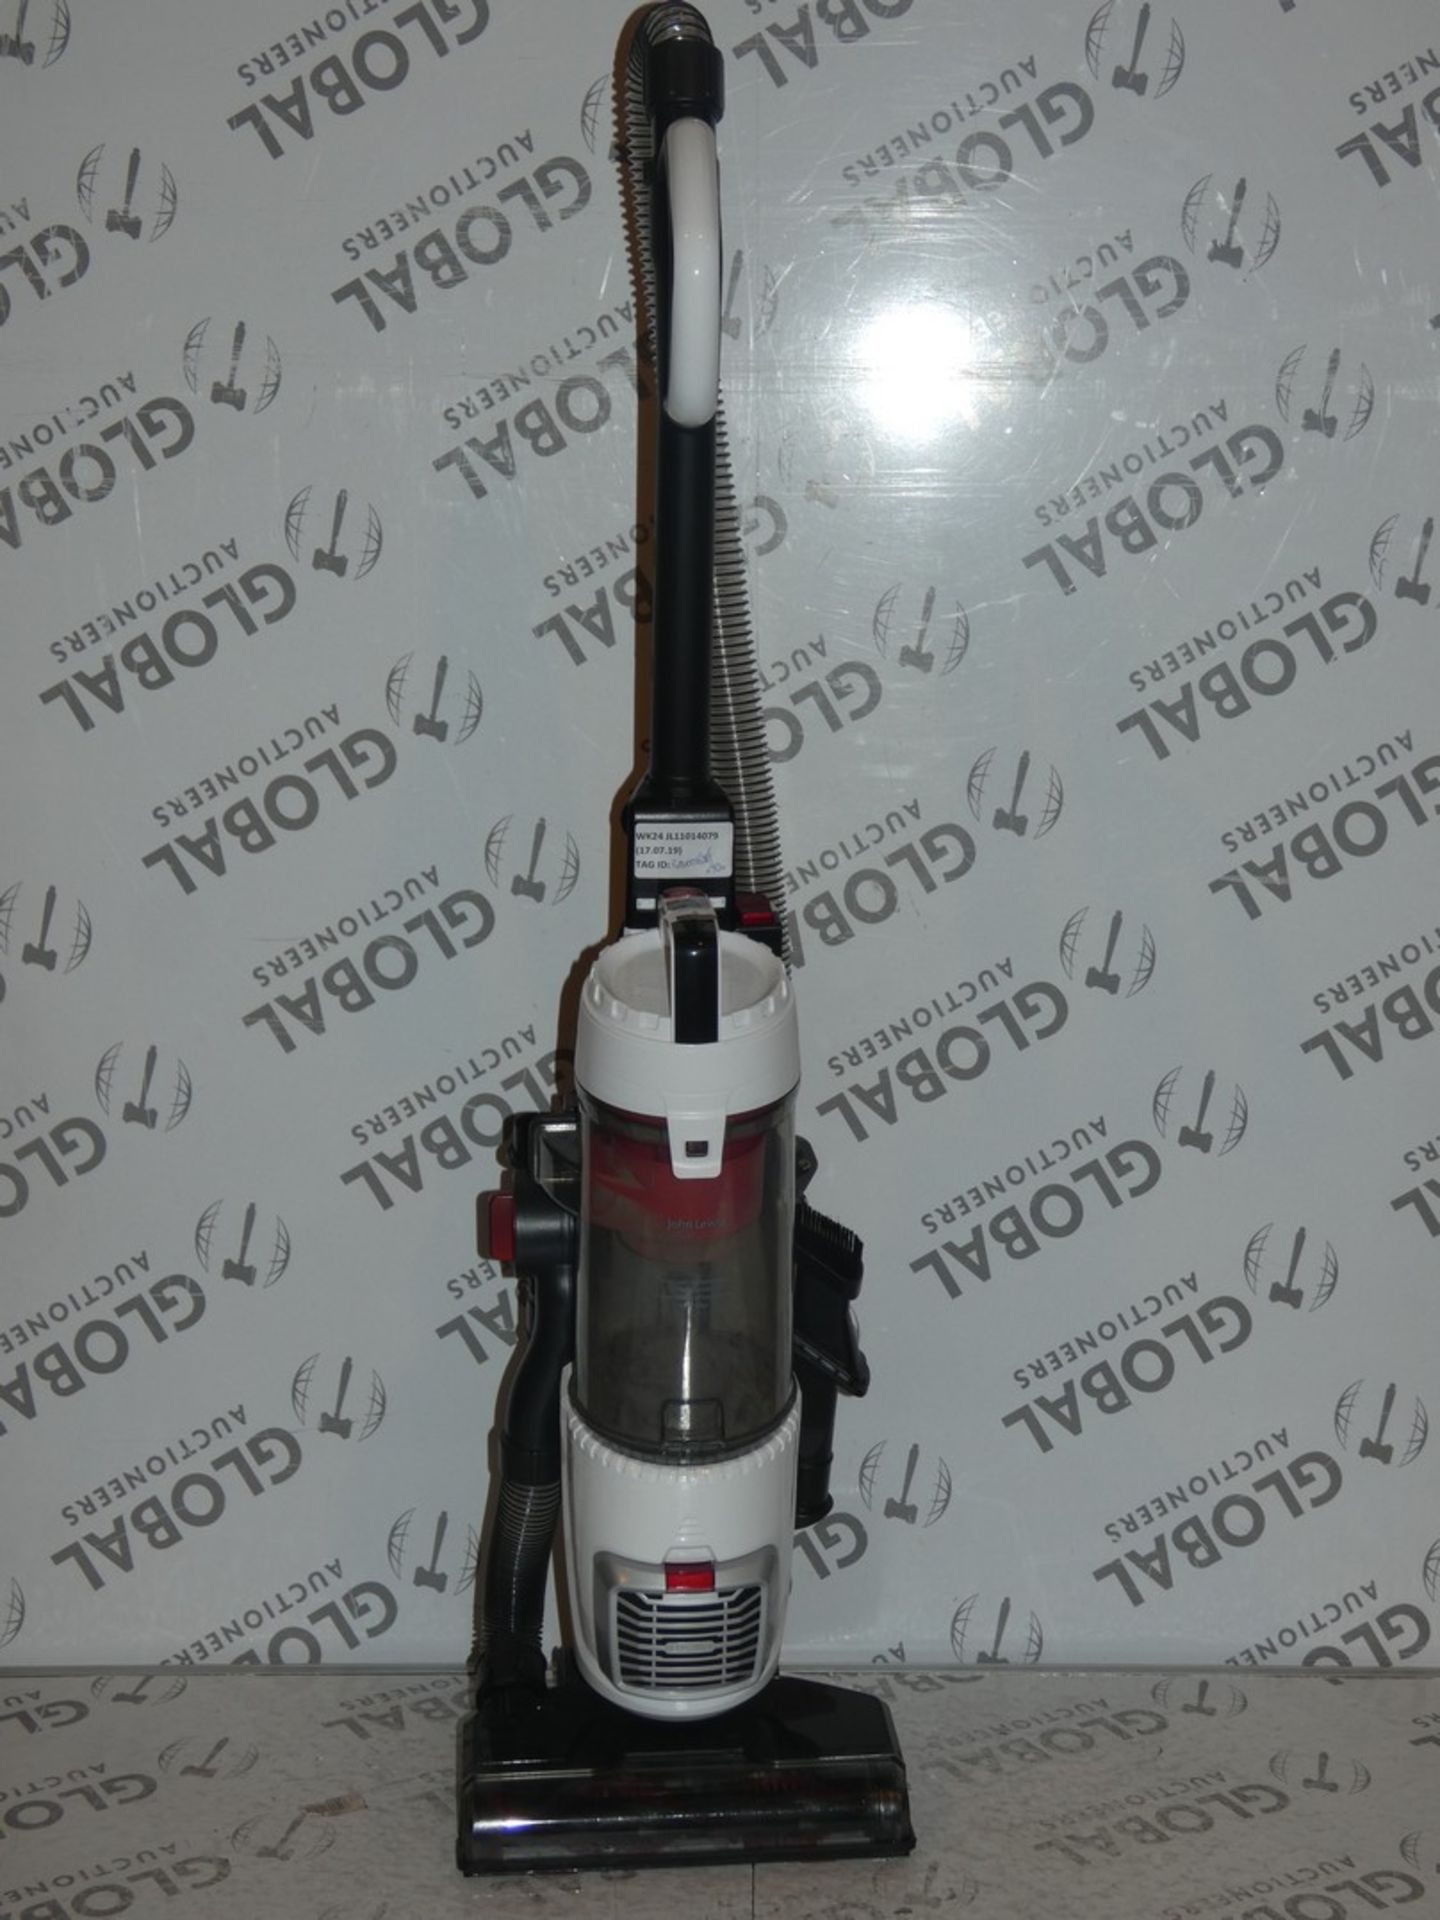 John Lewis Upright Single Cyclonic 3 Litre Capacity Vacuum Cleaner RRP £90 (2130814) (Viewing or